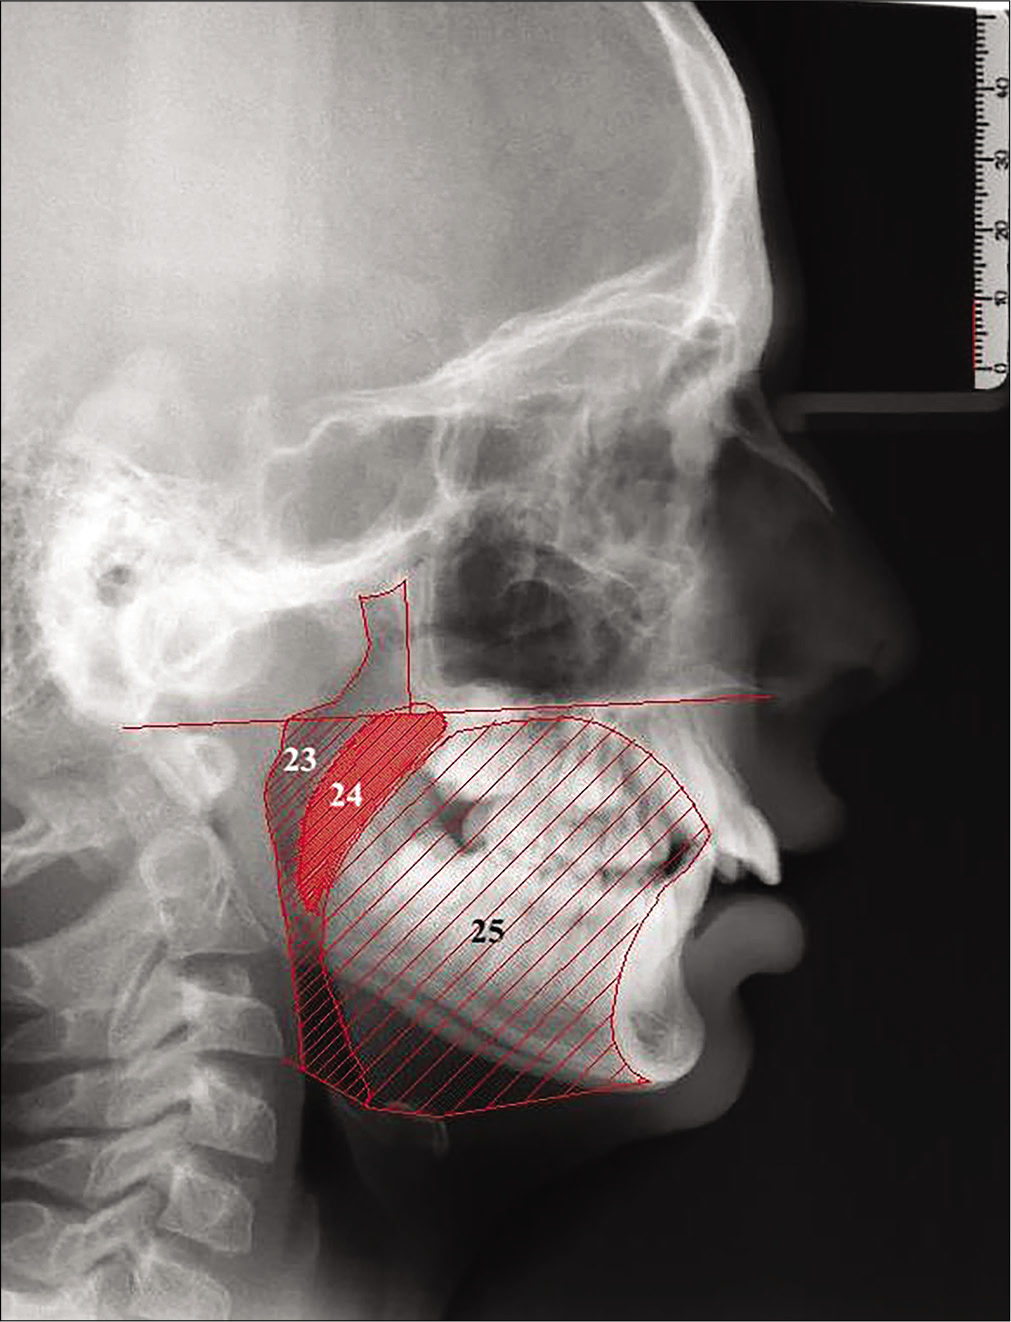 Area measurements of the study: 23: Oropharyngeal area (mm2), an area limited superiorly by a backward extension of the maxillary plane and inferiorly by a line joining E and C3 points; 24: Uvula area (mm2), an area formed by outer boundaries of uvula and limited superiorly by maxillary plane, 25: Tongue area (mm2), an area surrounded posteriorly by the oropharynx and uvula, superiorly by the maxillary plane, anteriorly by the lingual aspects of the anterior teeth and lingual mandibular symphyseal contour and inferiorly by the line extending from the point E to the point H and the line joining H and Me points.